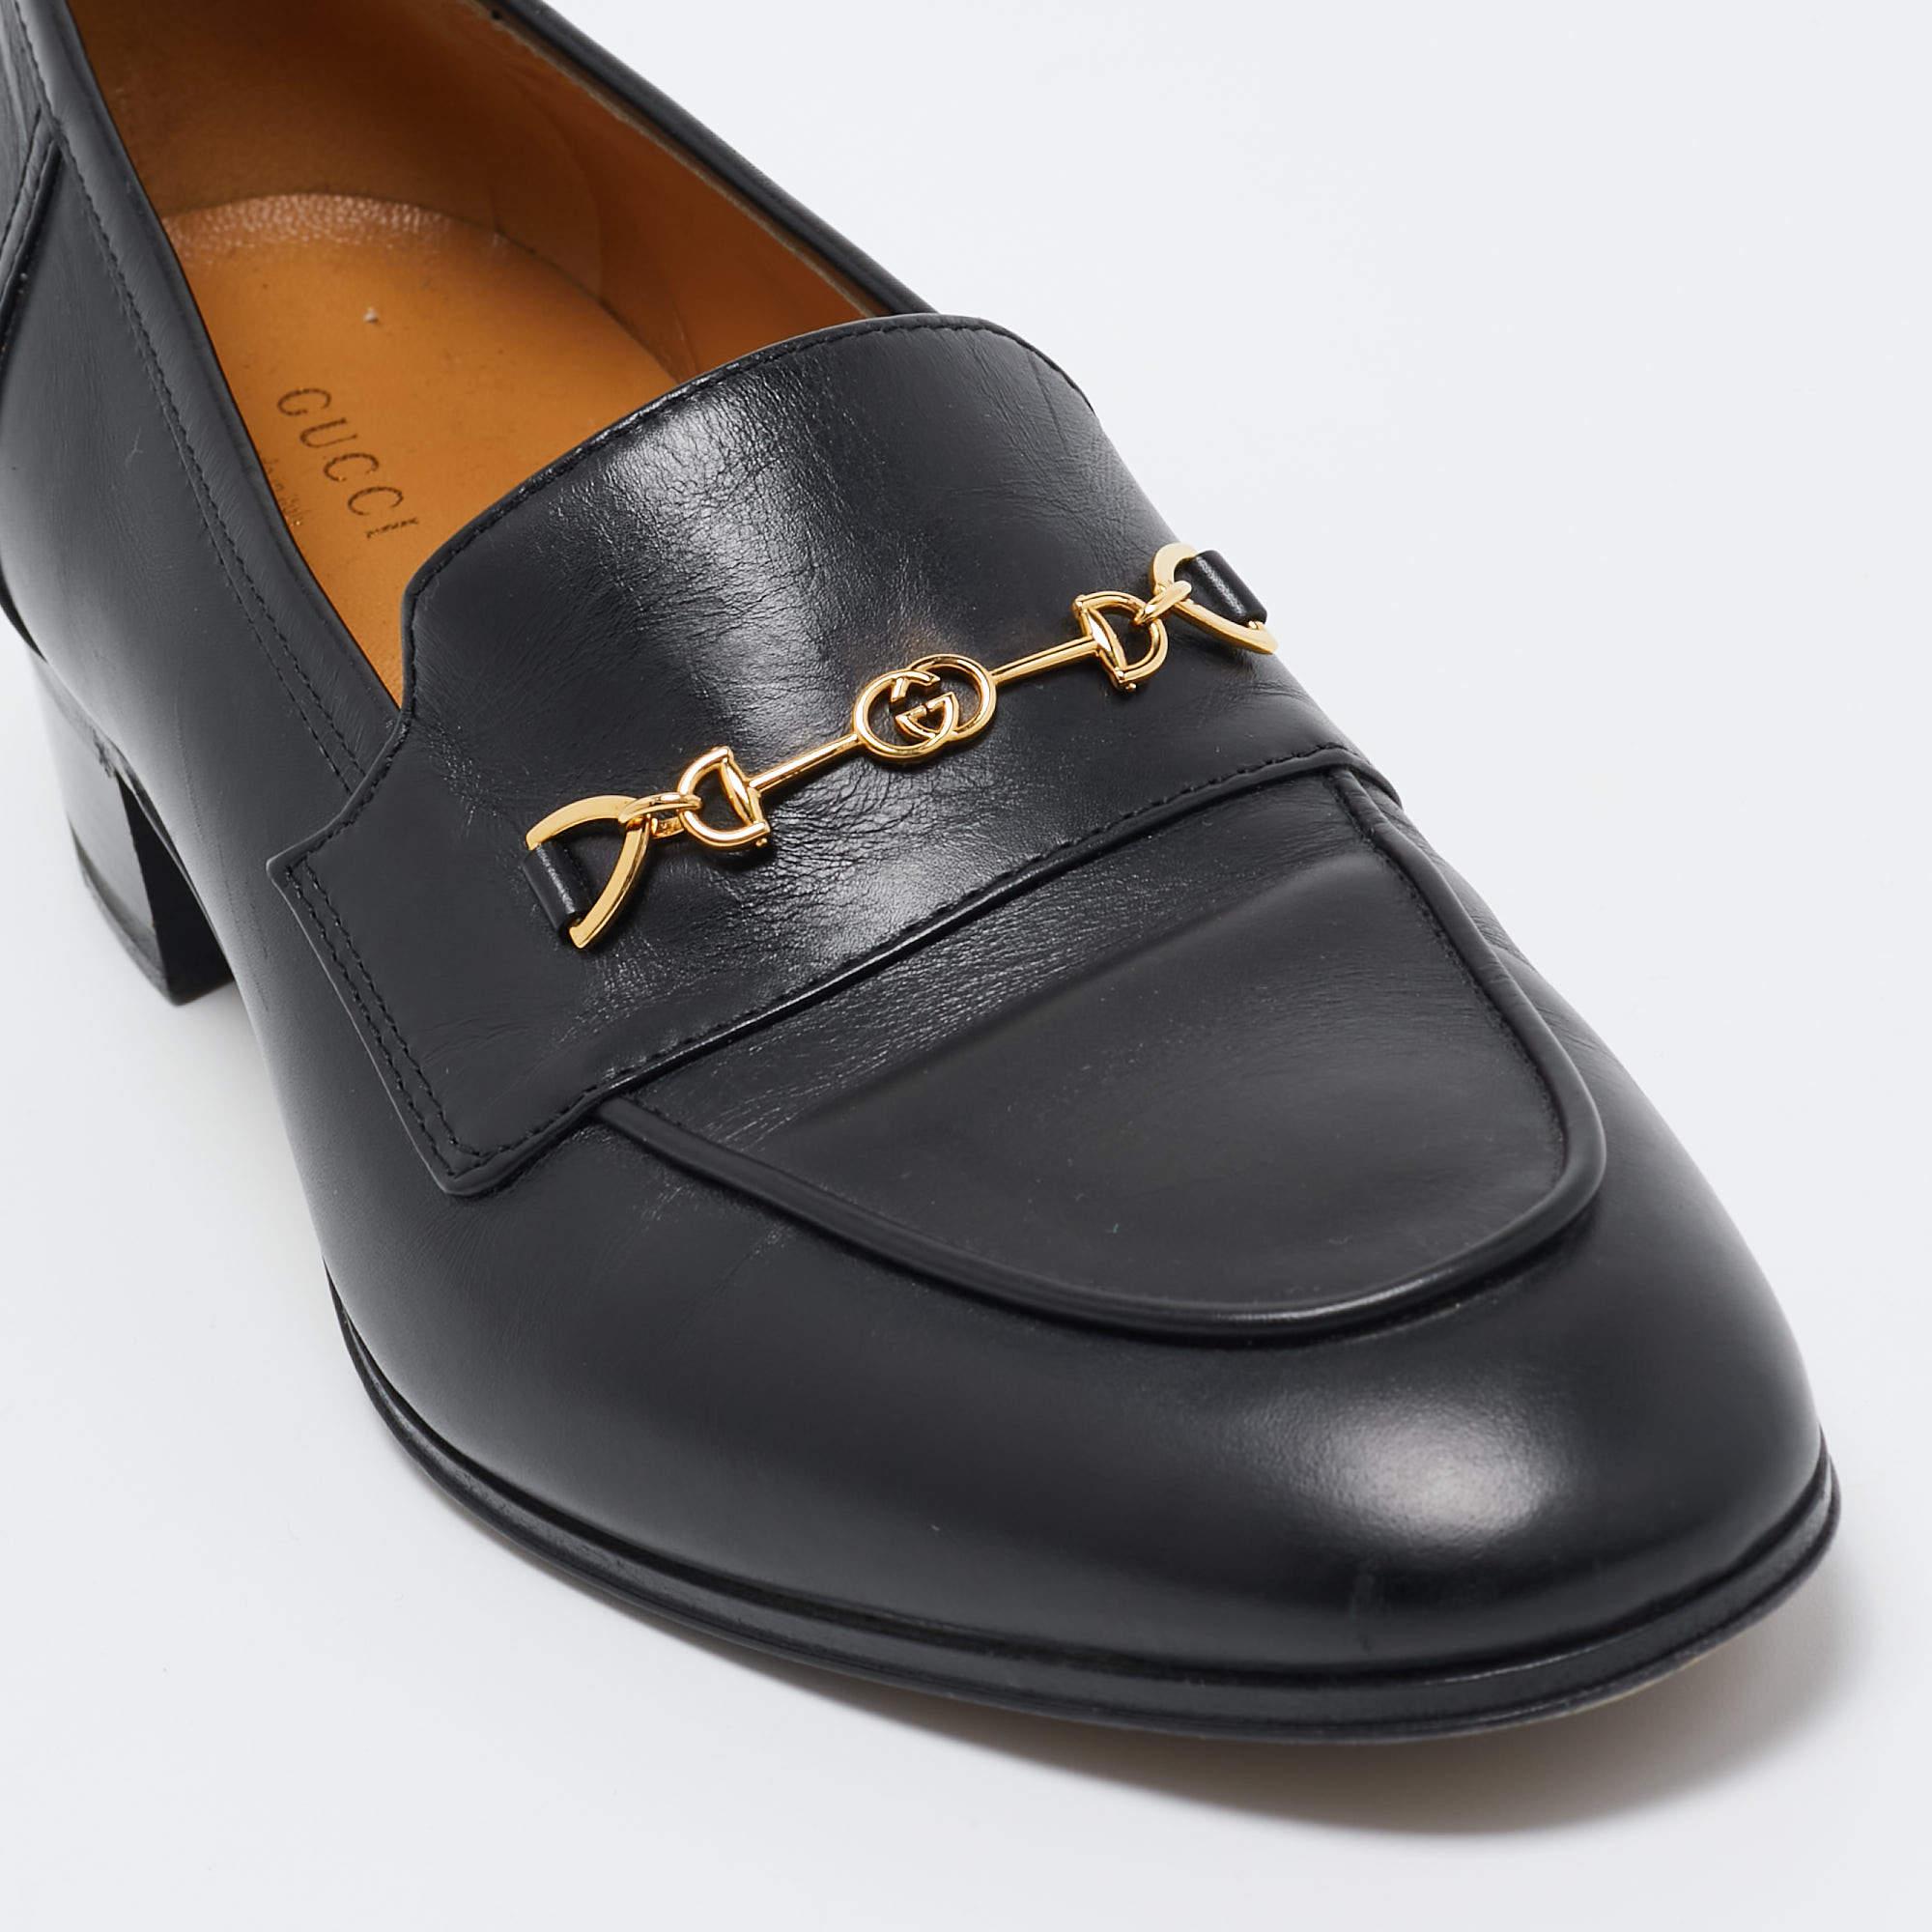 Gucci Black Leather Horsebit Loafers Size 39 3